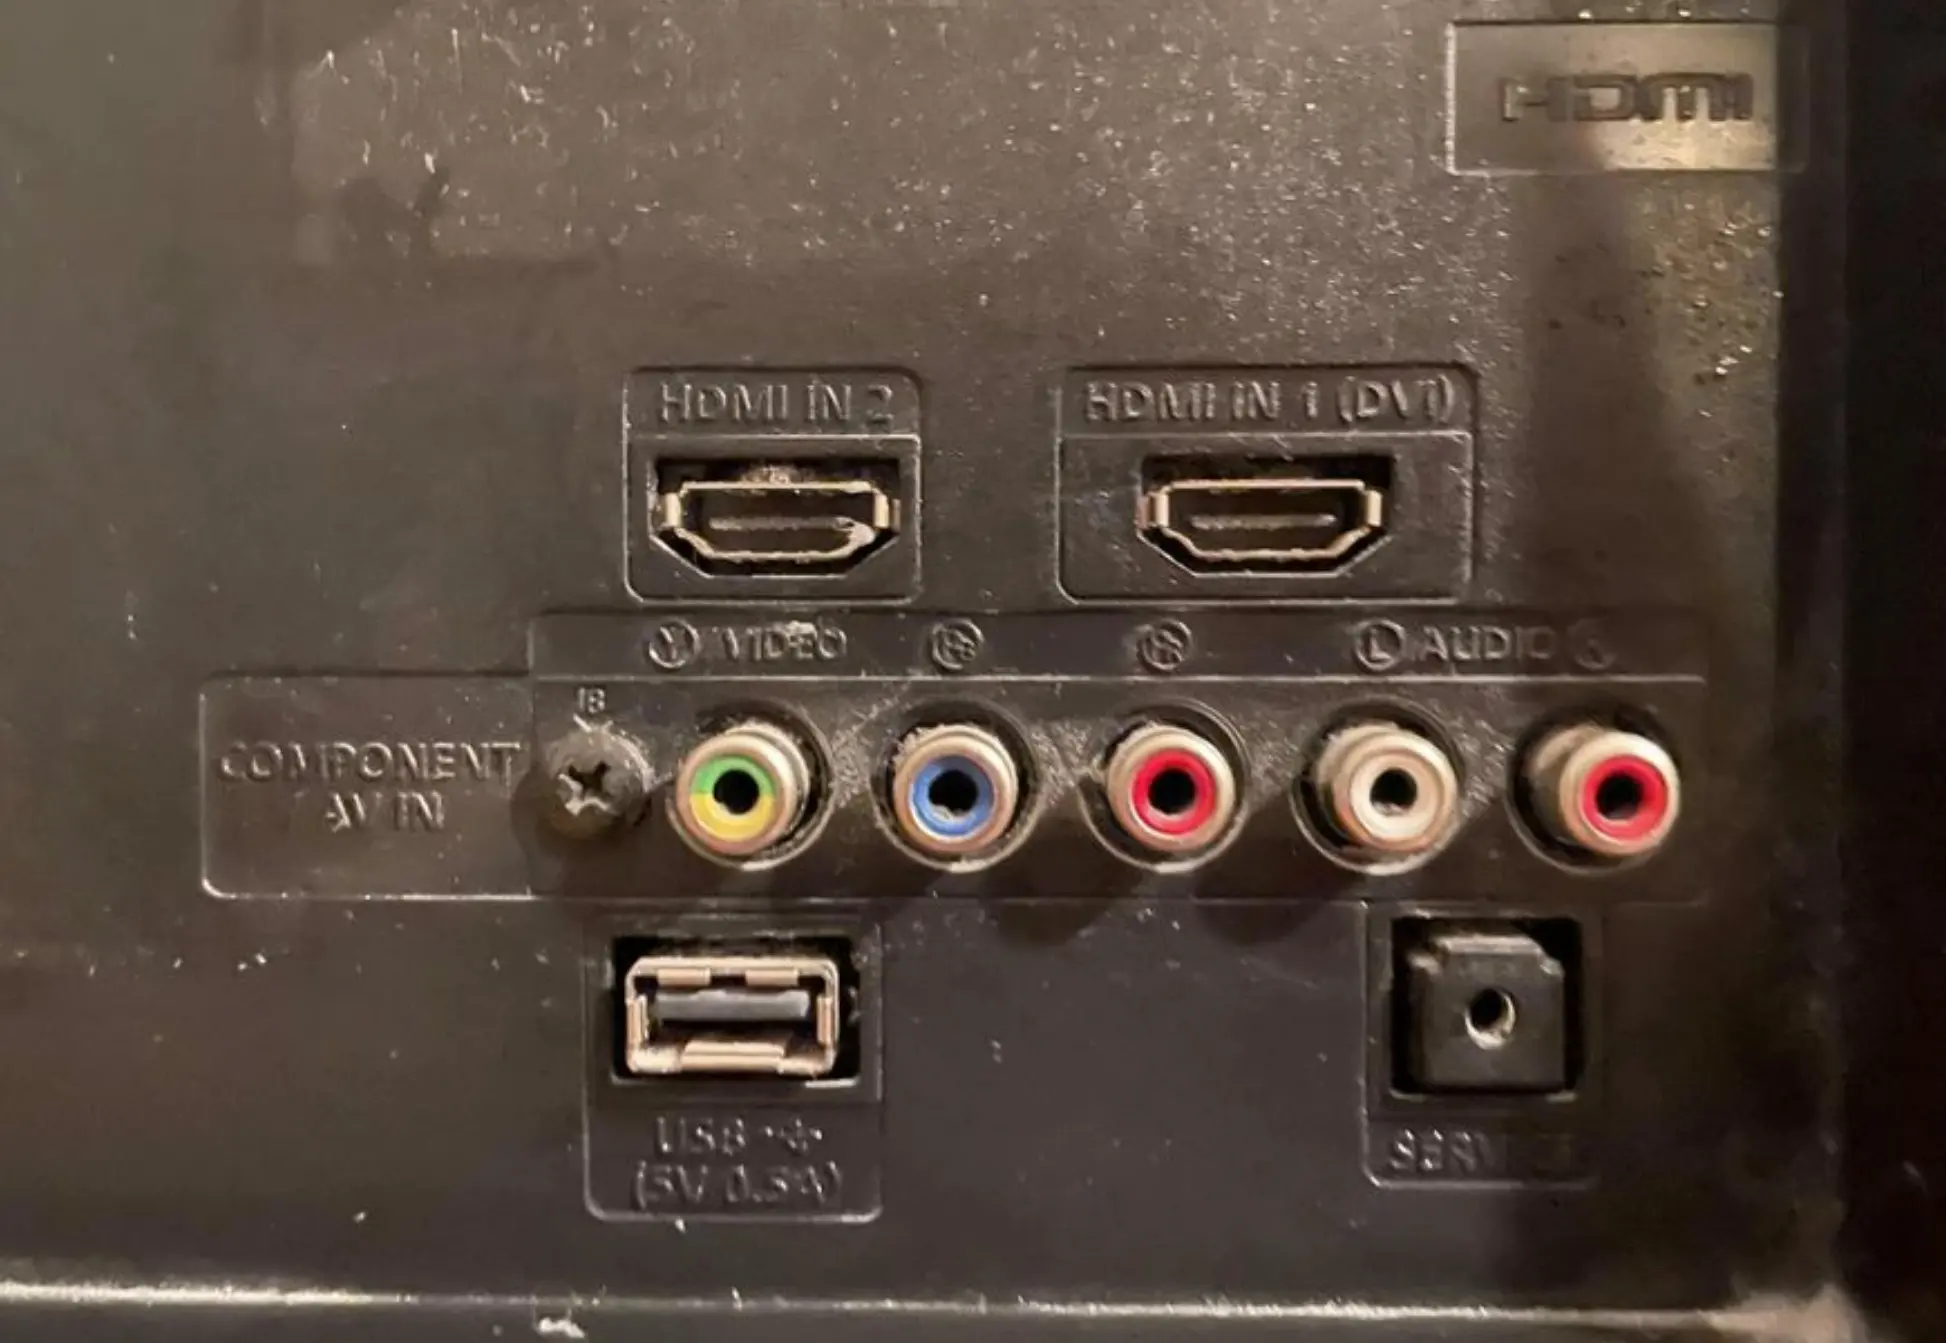 Disconnect all HDMI-connected devices from TV